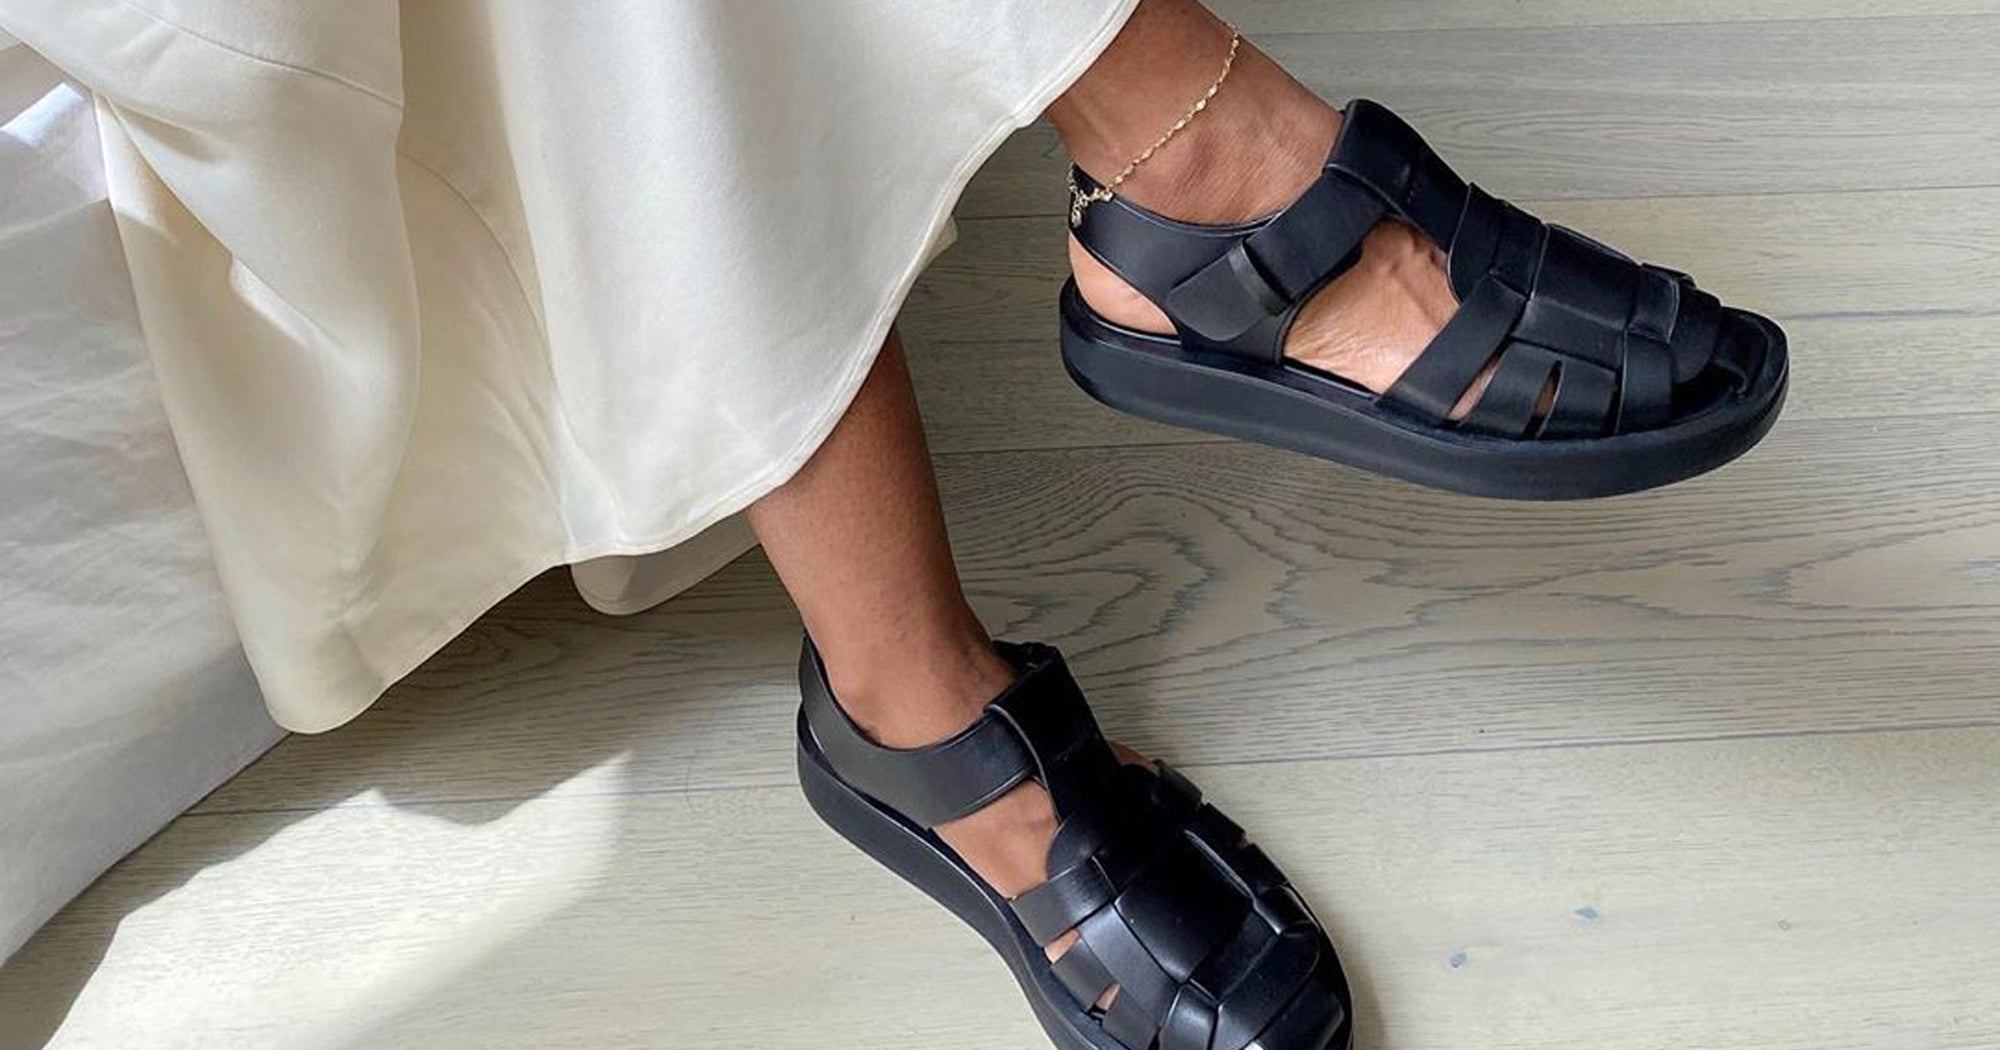 Fisherman Sandals Are Designers Latest Ugly Shoe Trend